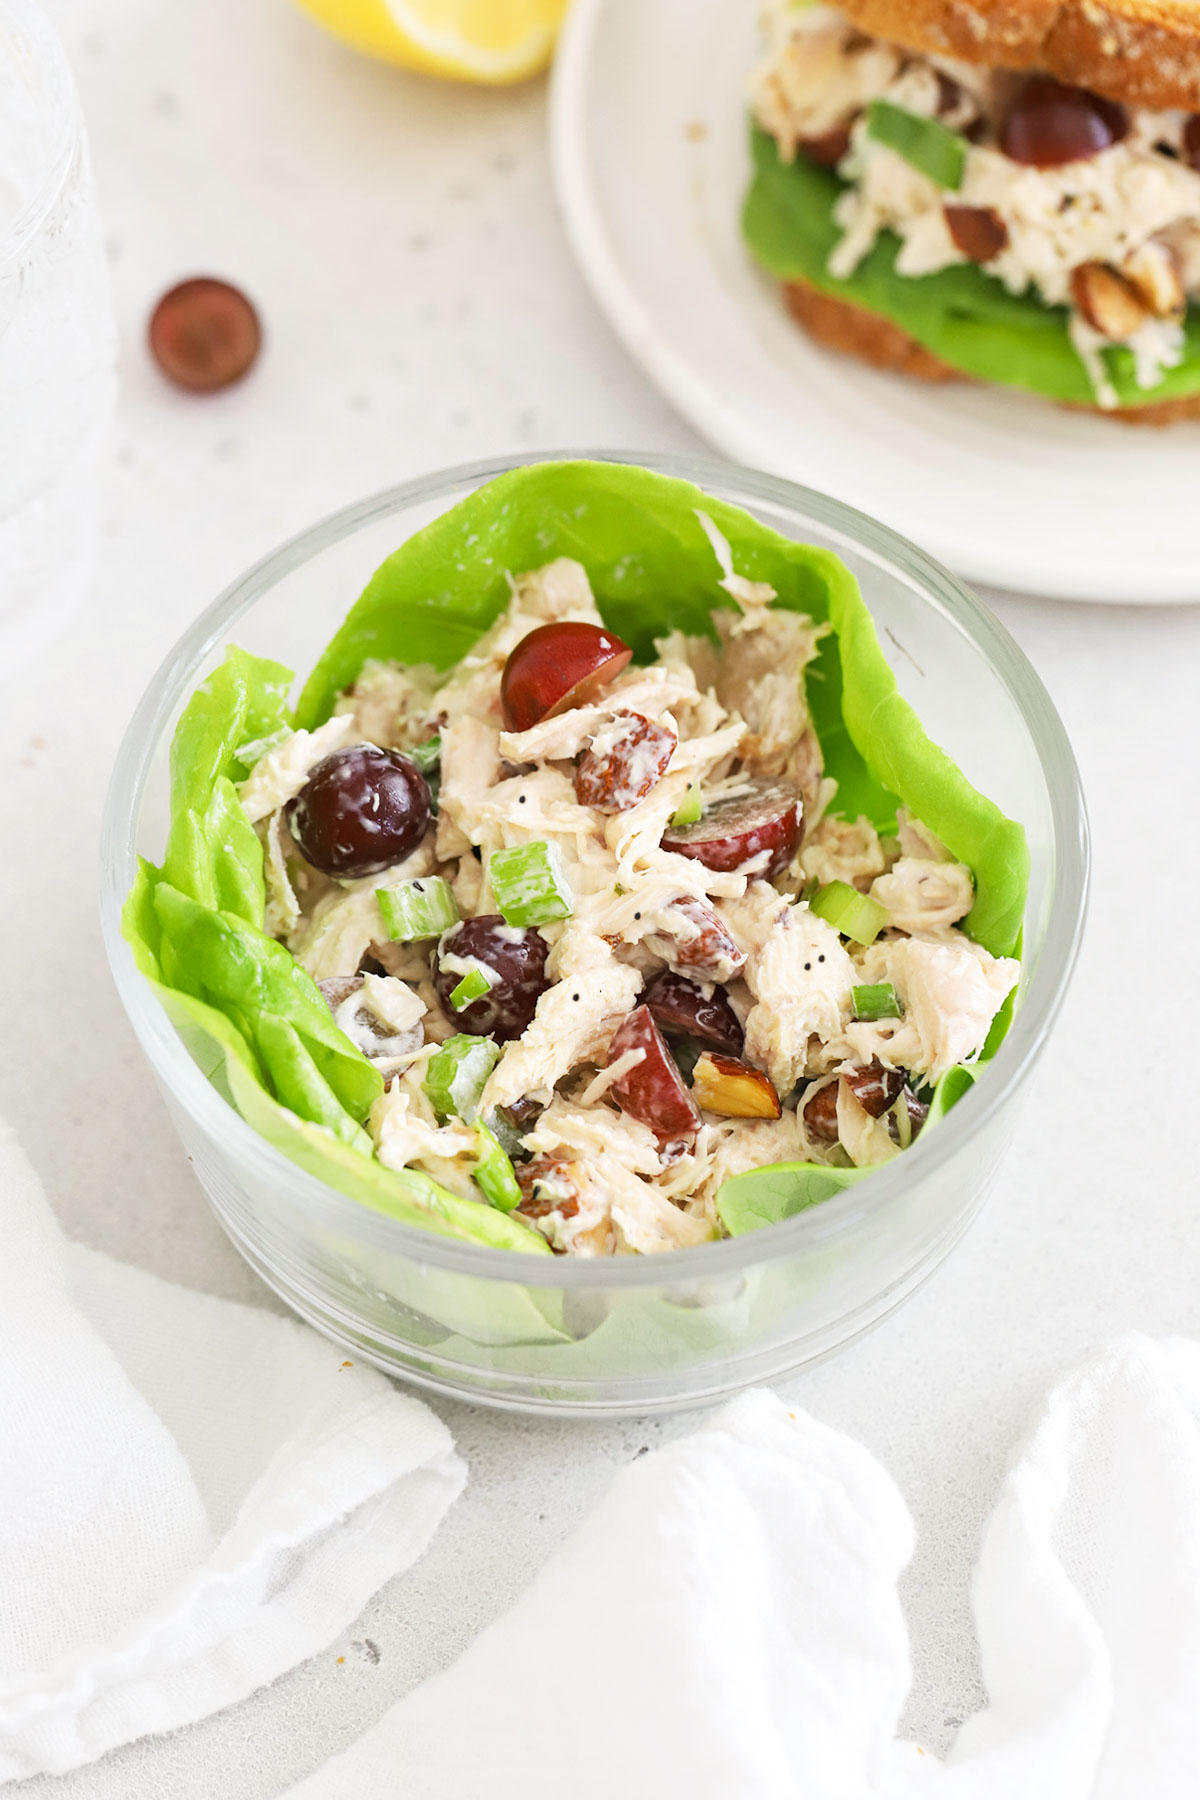 classic chicken salad with grapes over salad greens